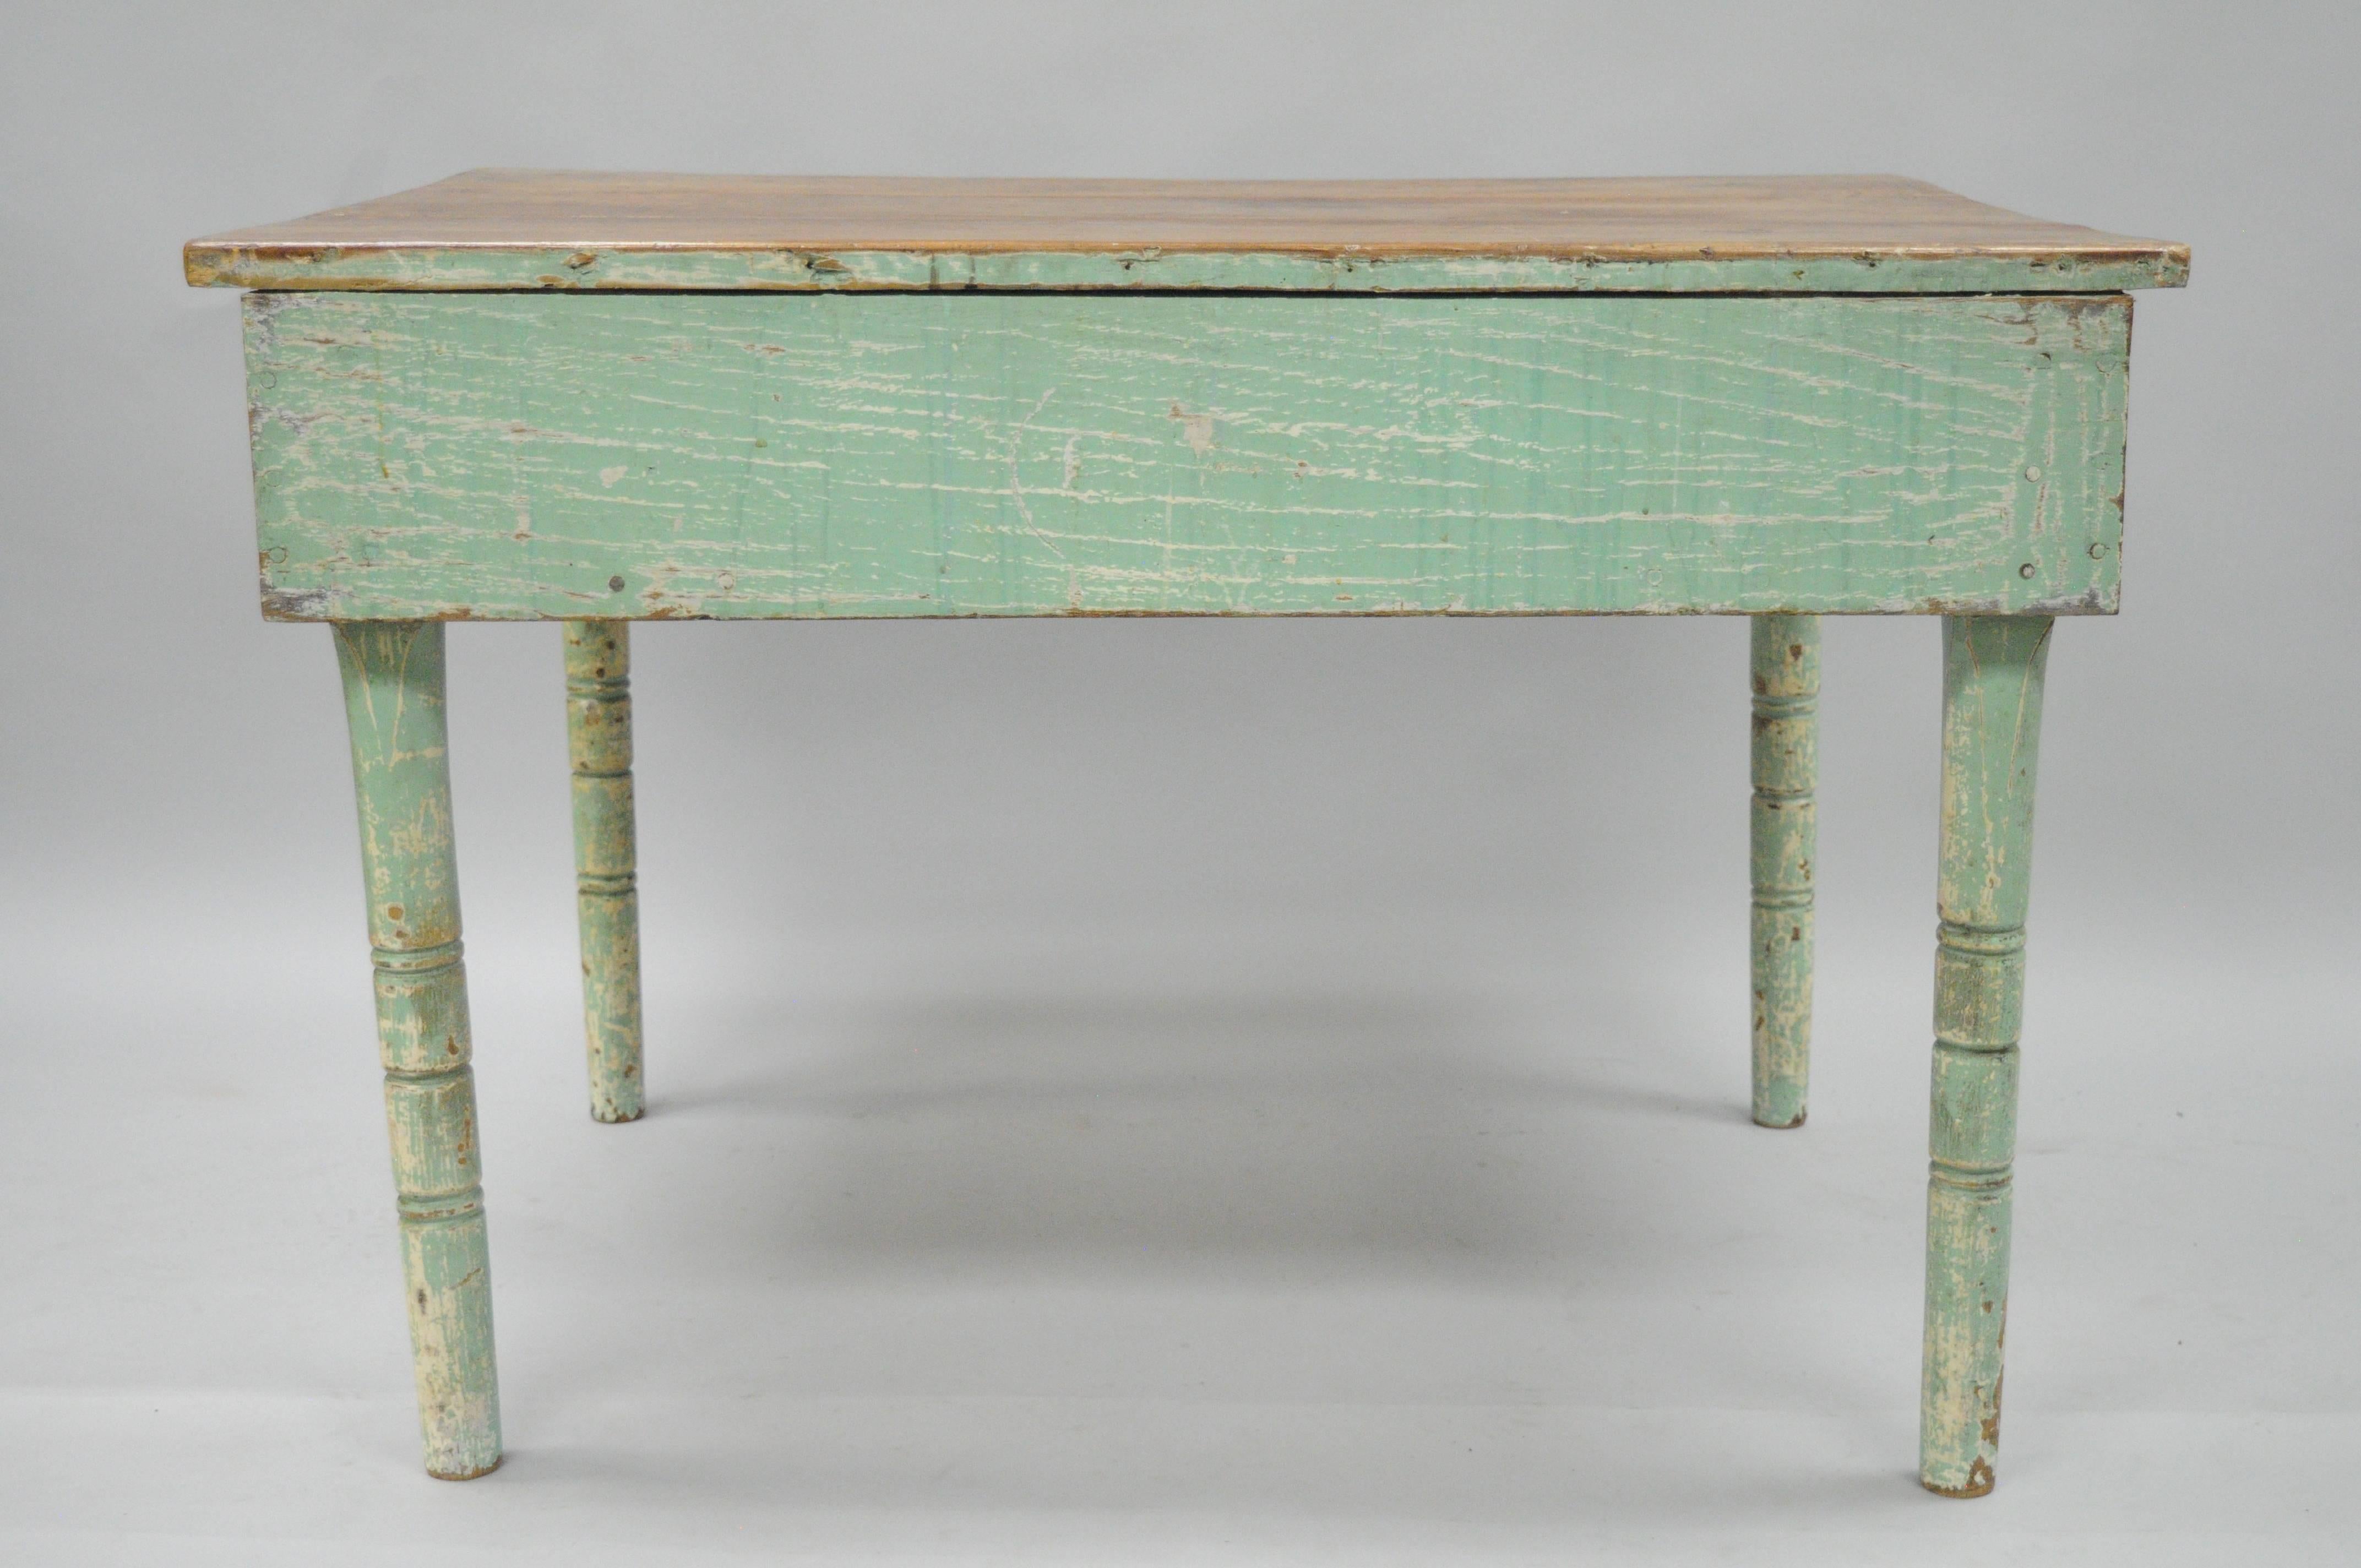 19th Century American Primitive Blue Green Distress Painted Rustic Barn Wood Farm Work Table For Sale